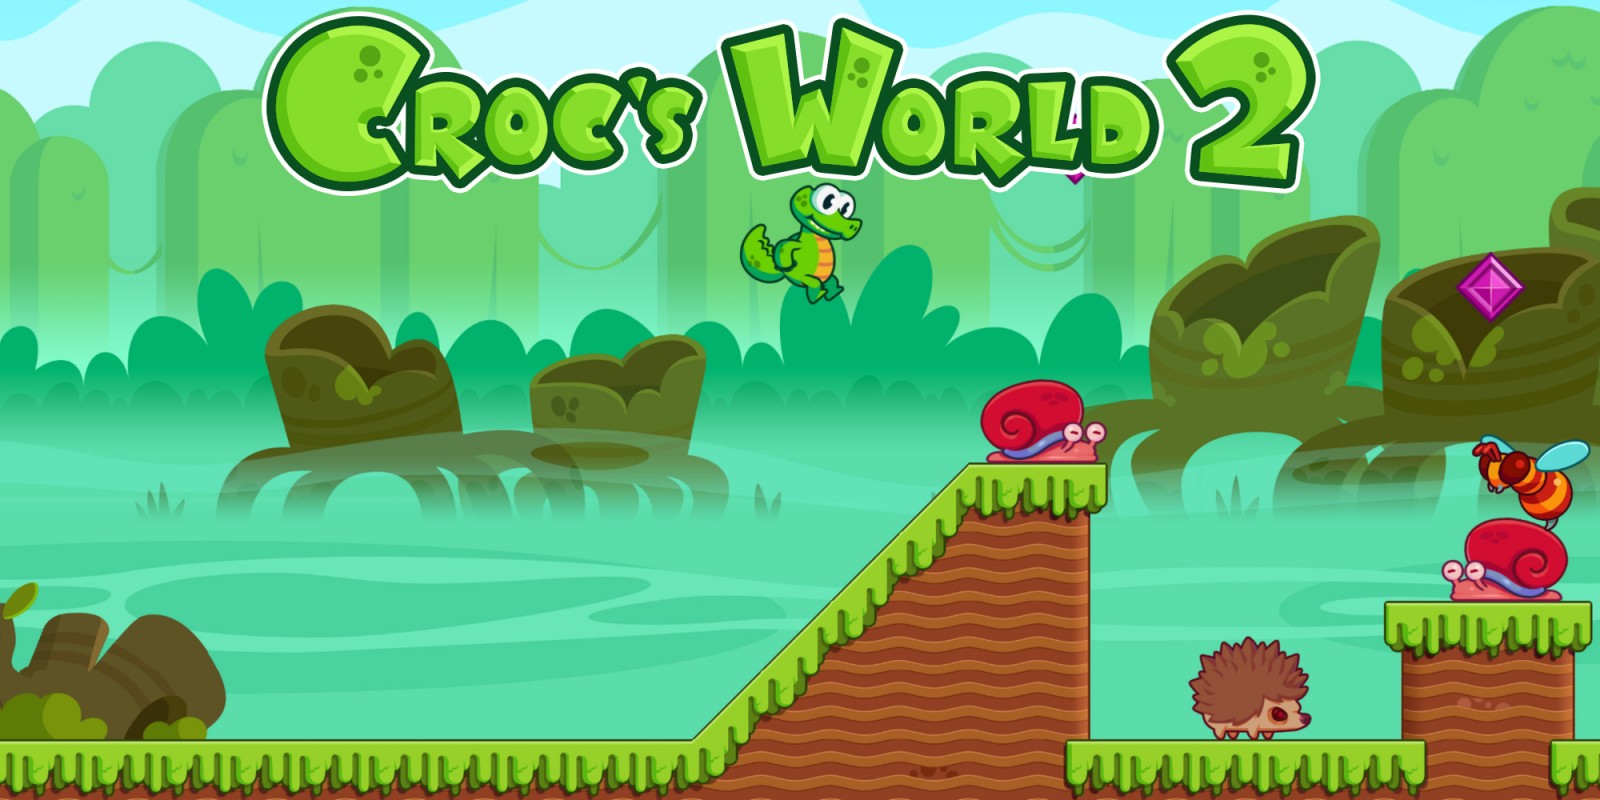 for android download Croc